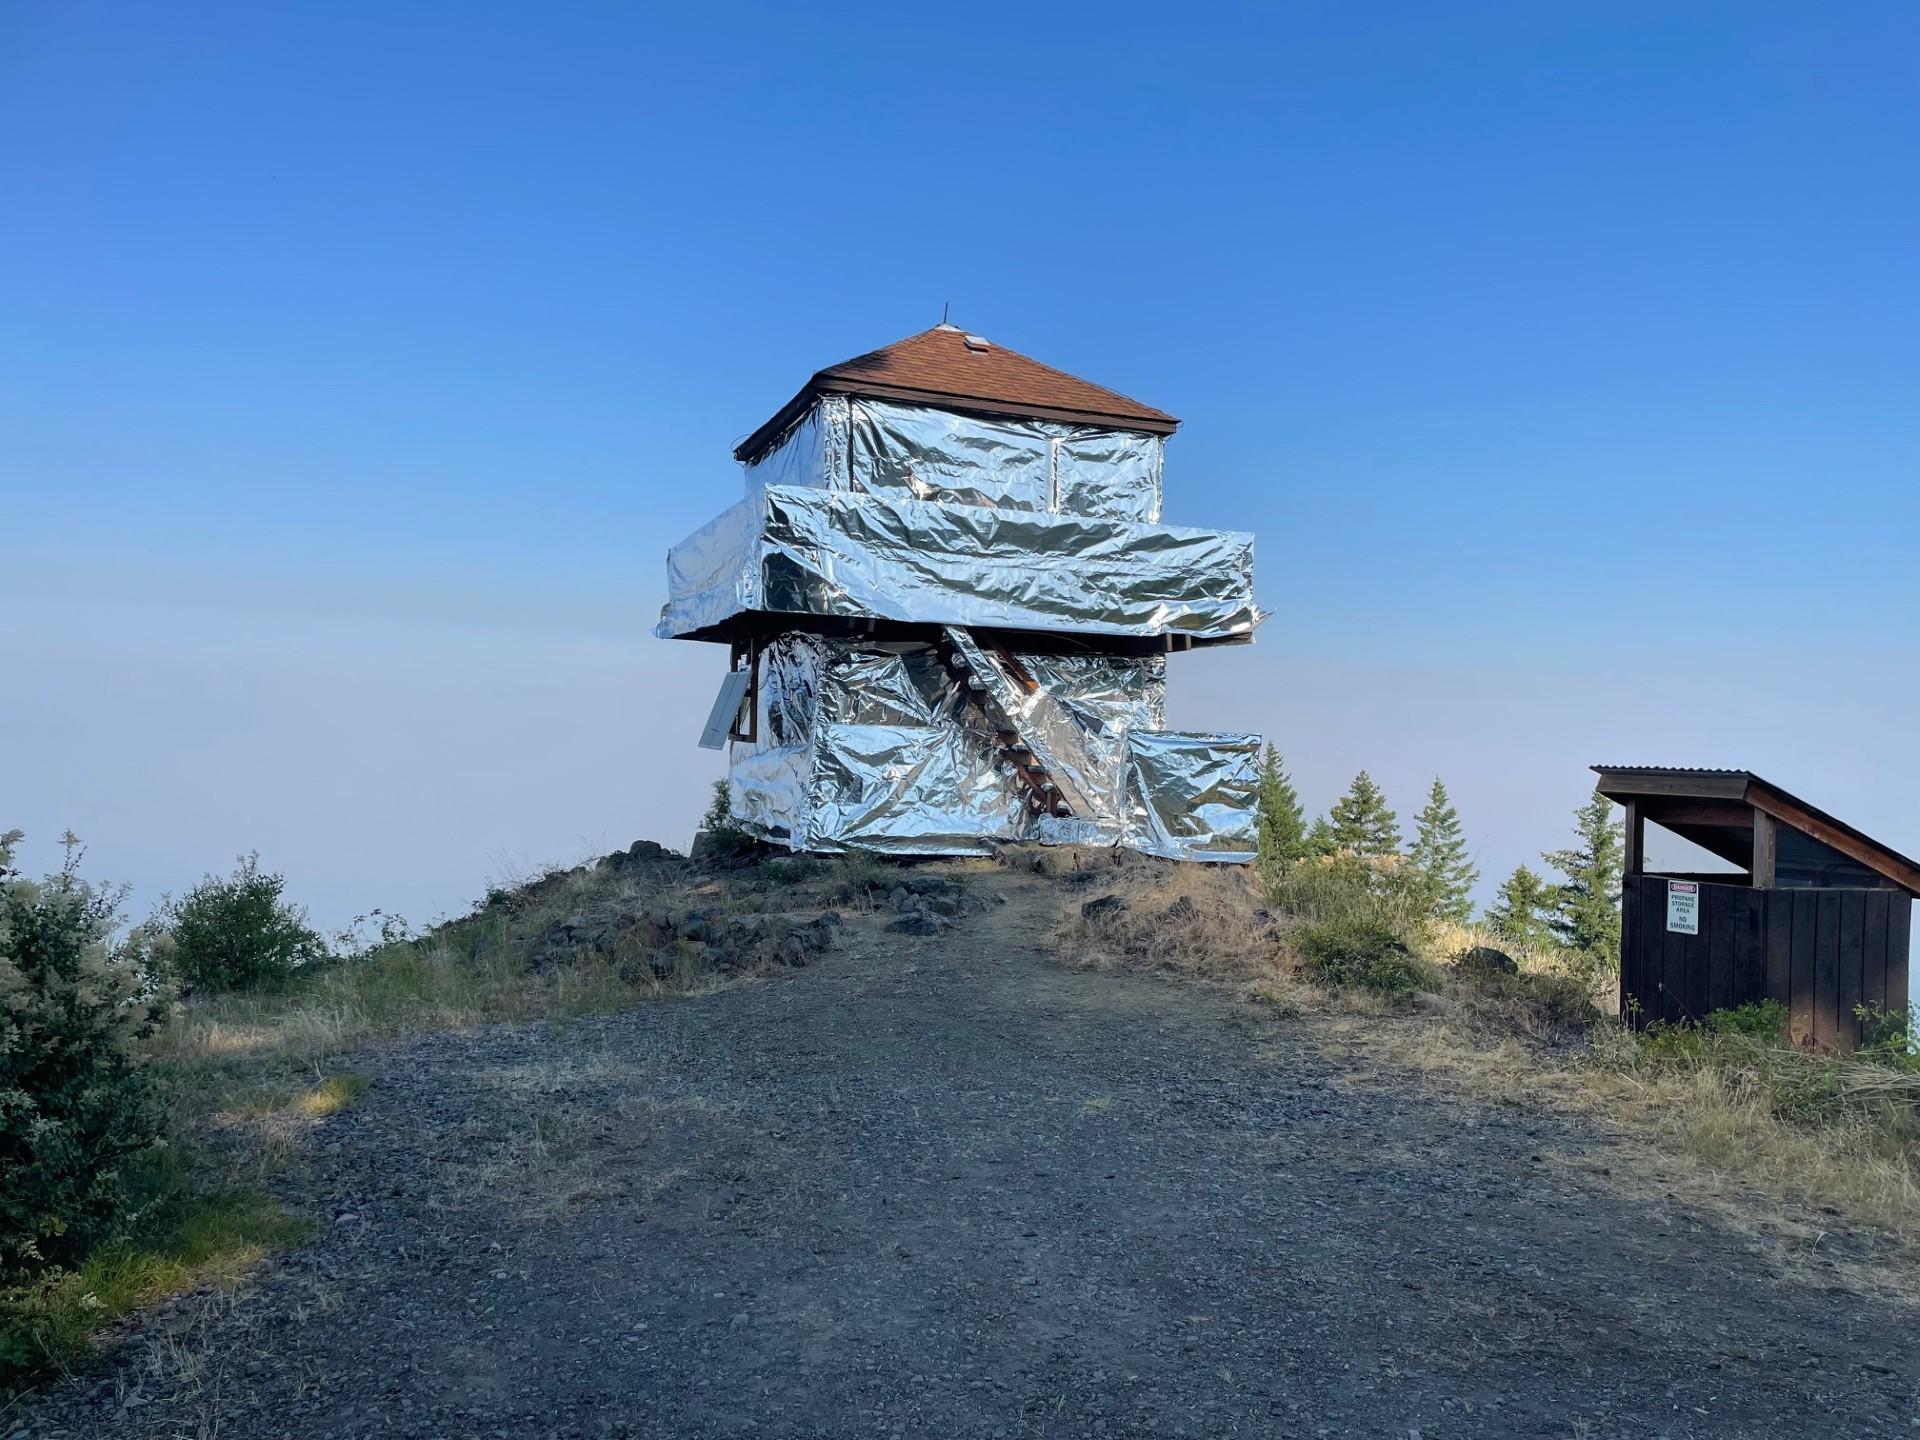 The Pig Iron Lookout is wrapped in shiny silver protective sheeting